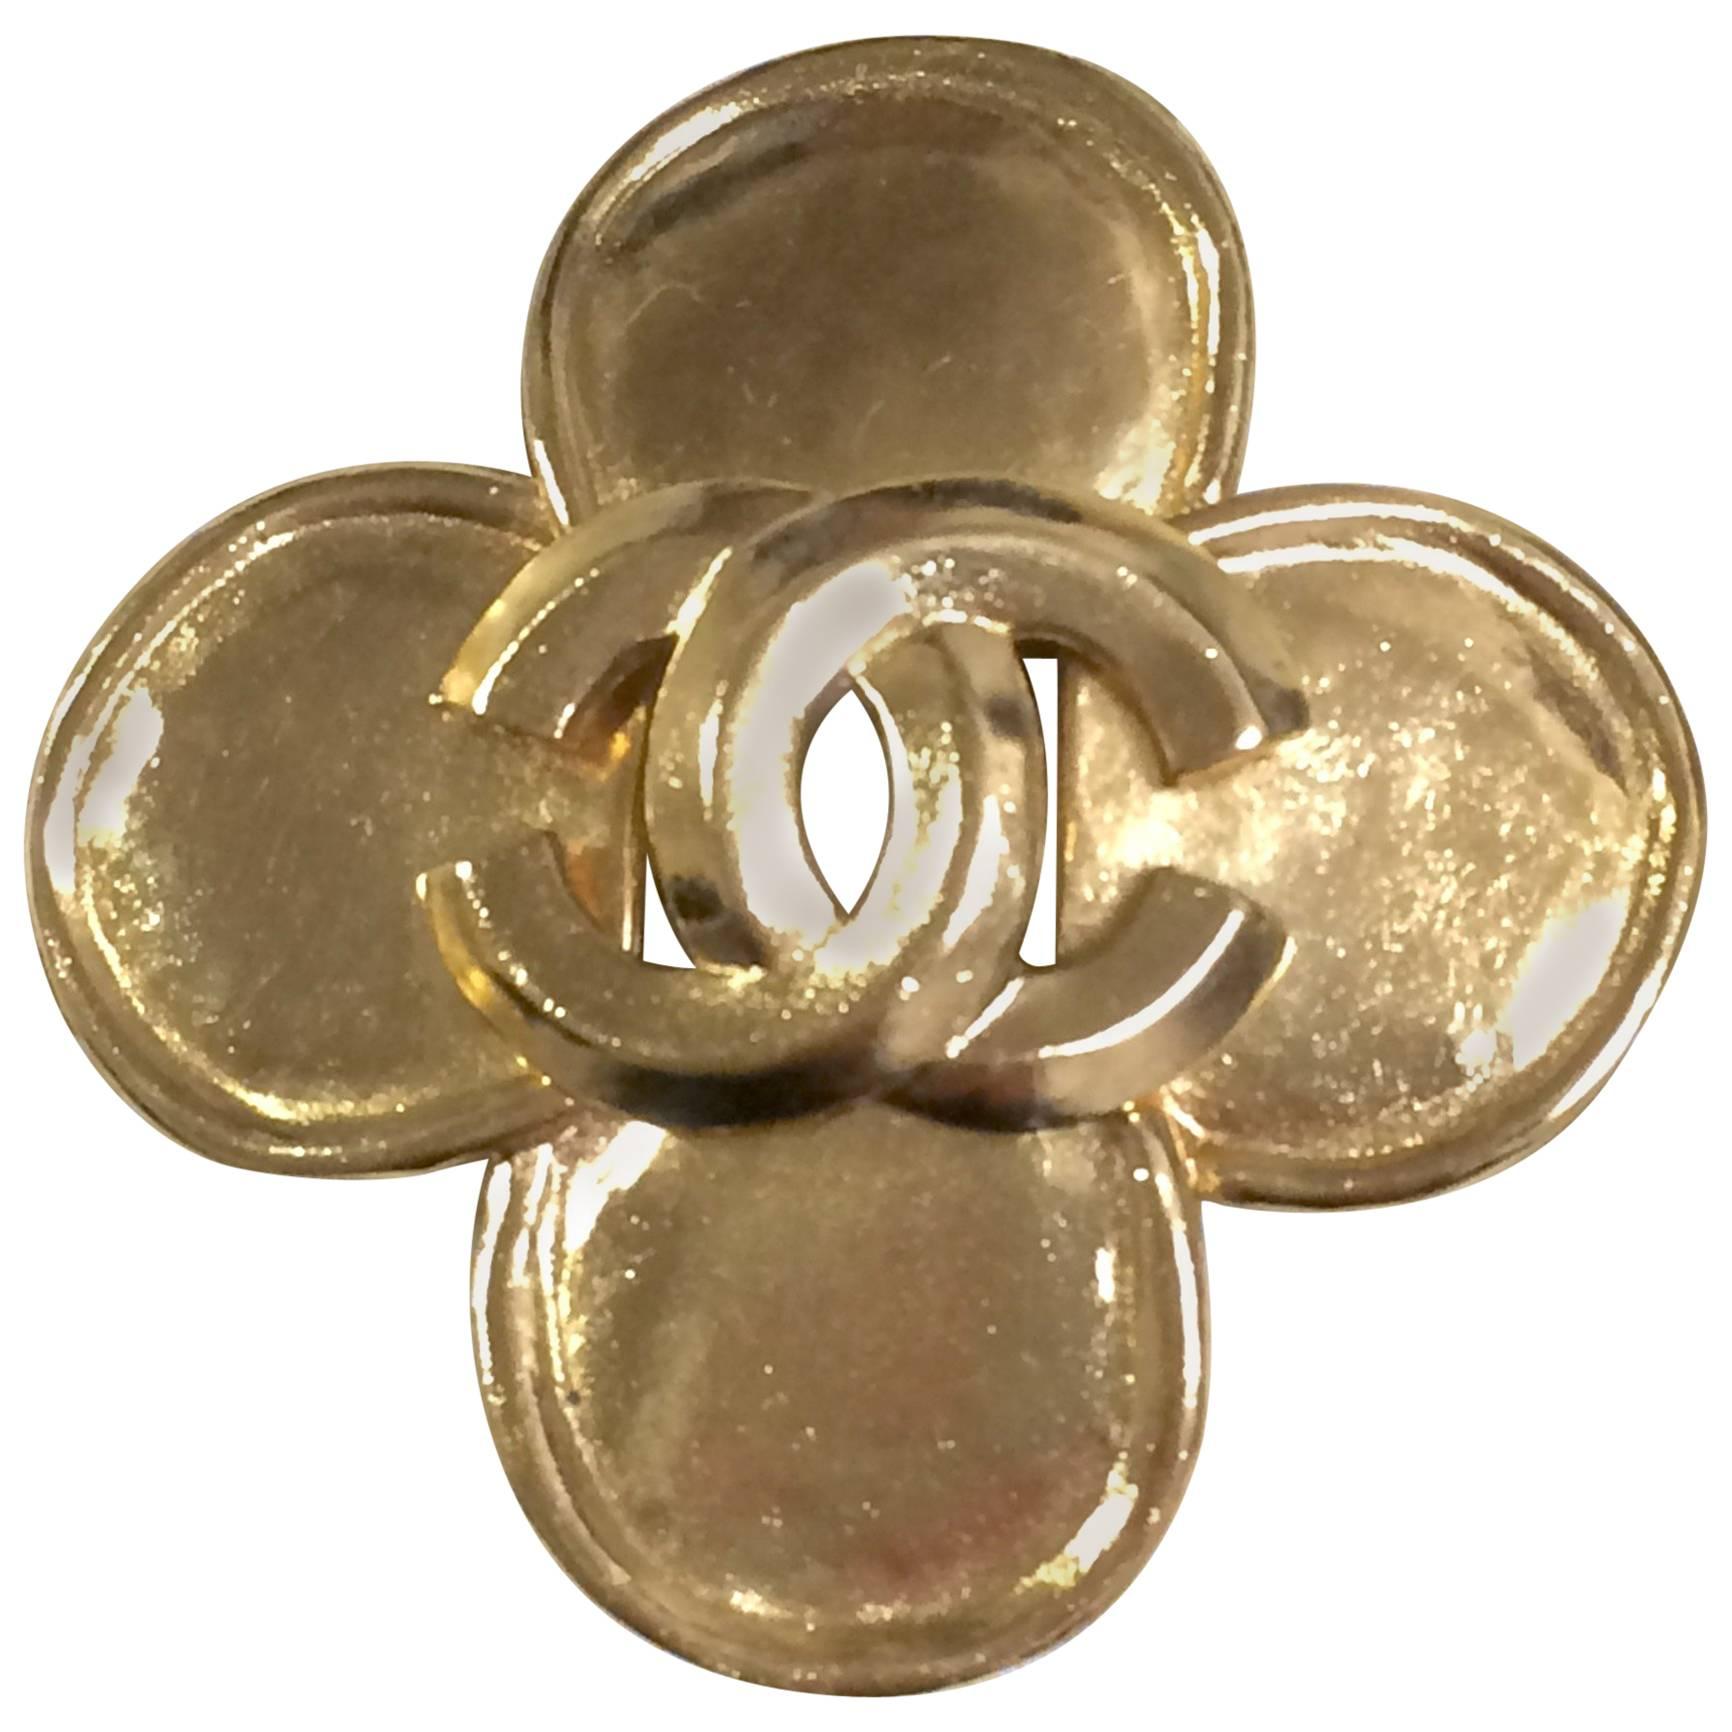 MINT. Vintage CHANEL Gold tone flower brooch with CC mark. Elegant and classic. 